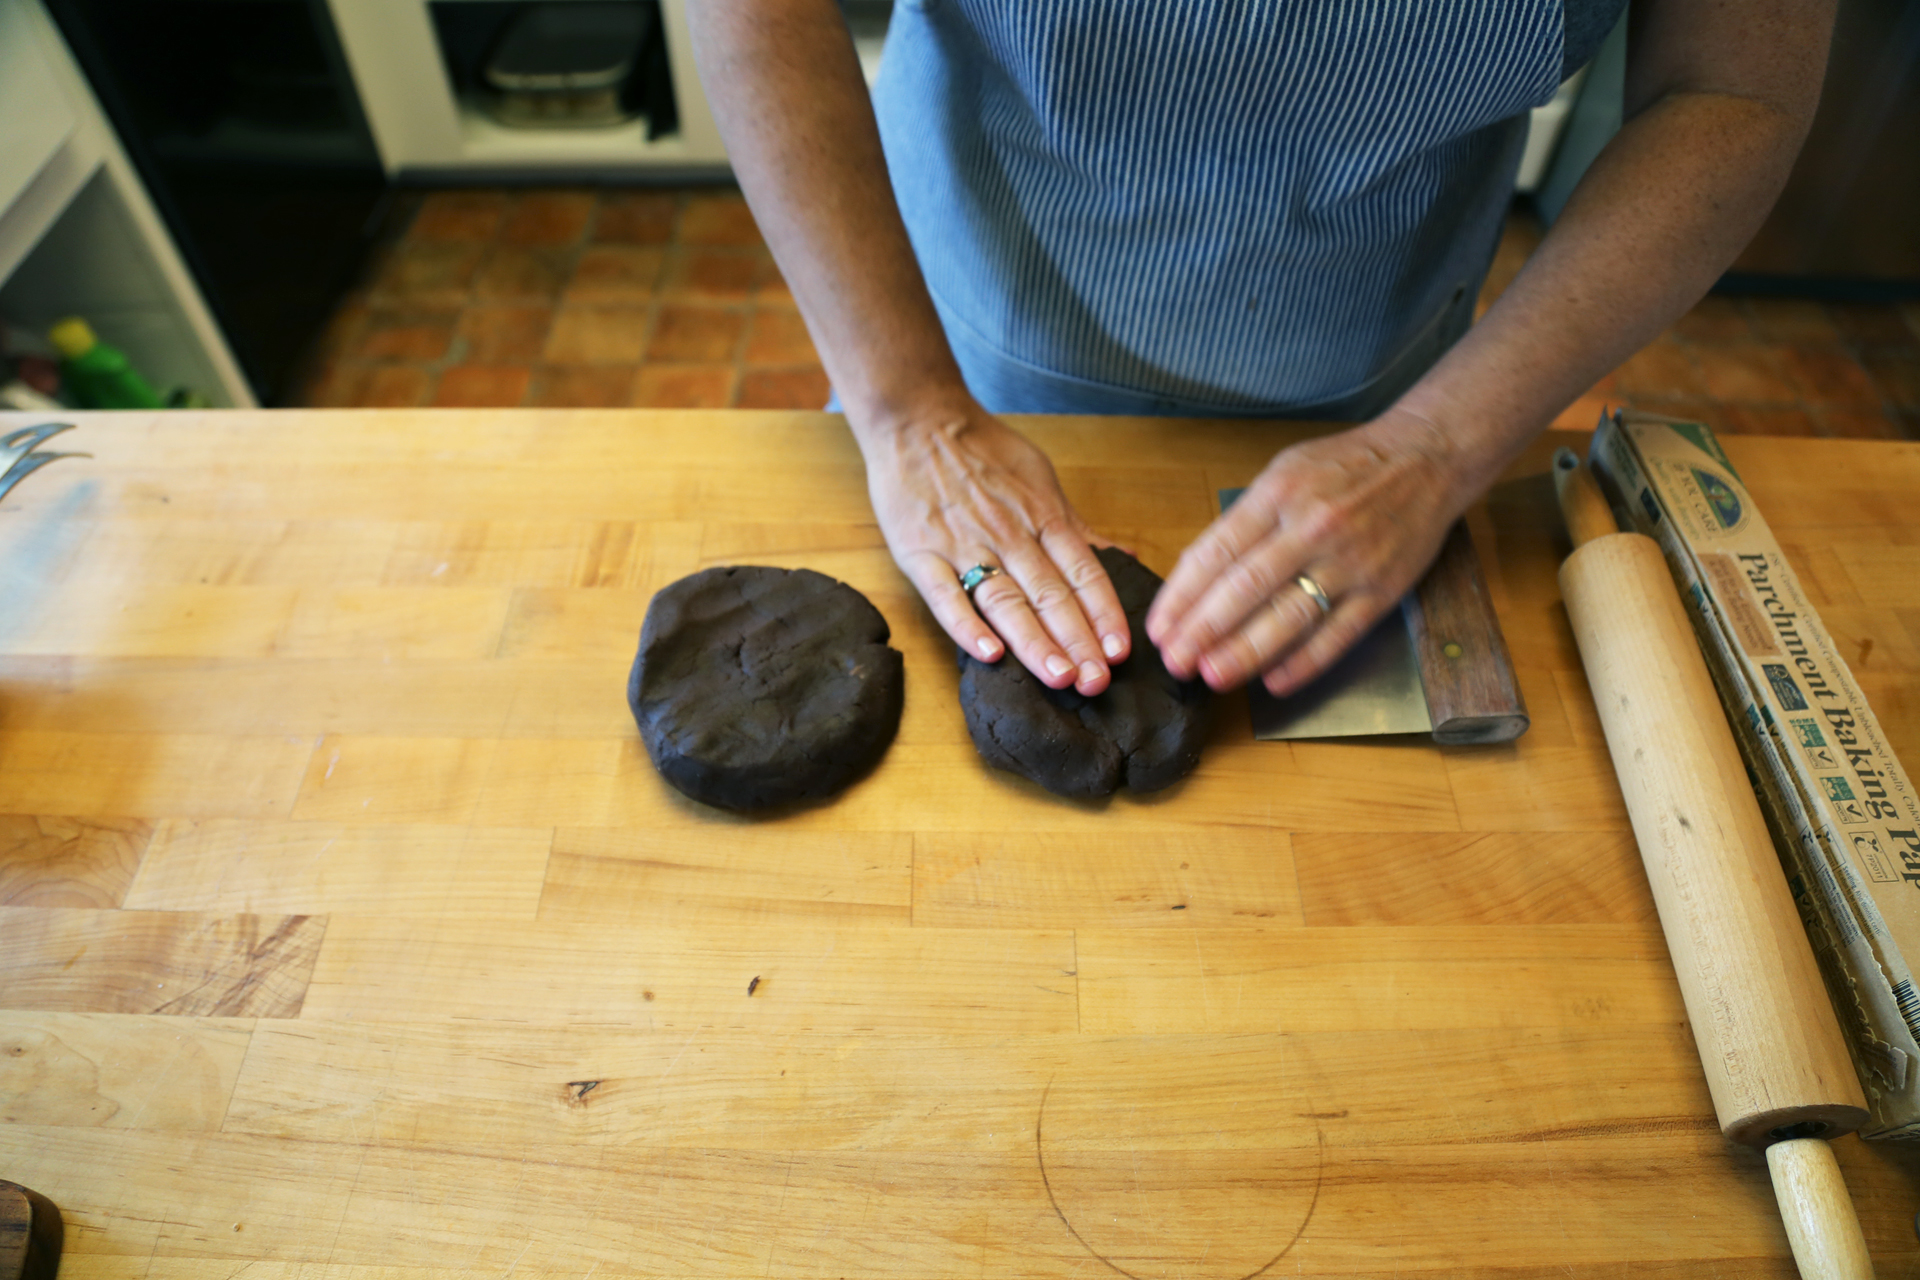 Divide the dough in half and form it into two disks.